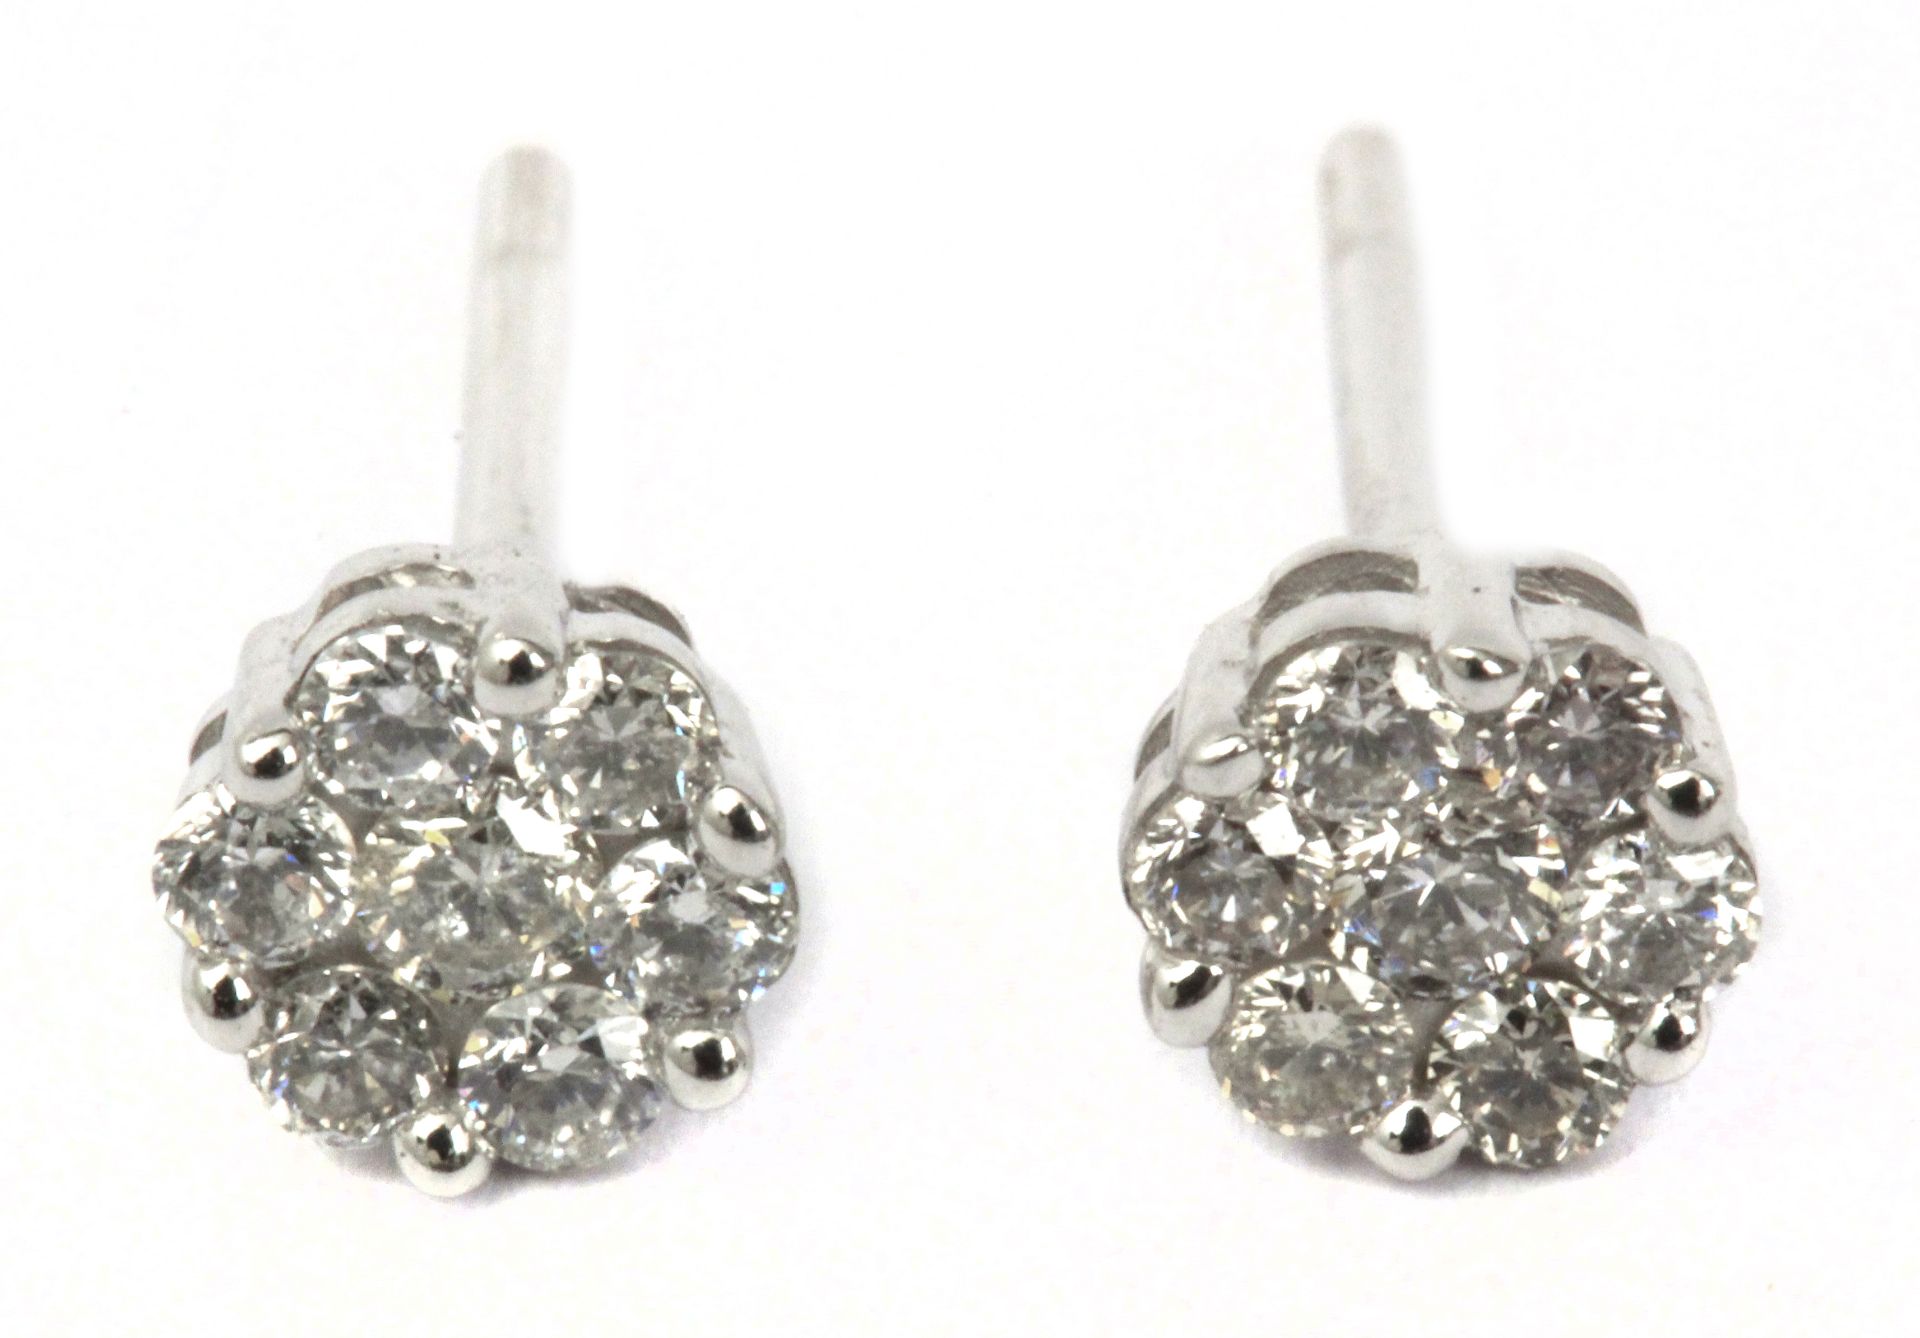 A pair of cluster stud earrings in an 18 k. white gold setting and brilliant cut diamonds